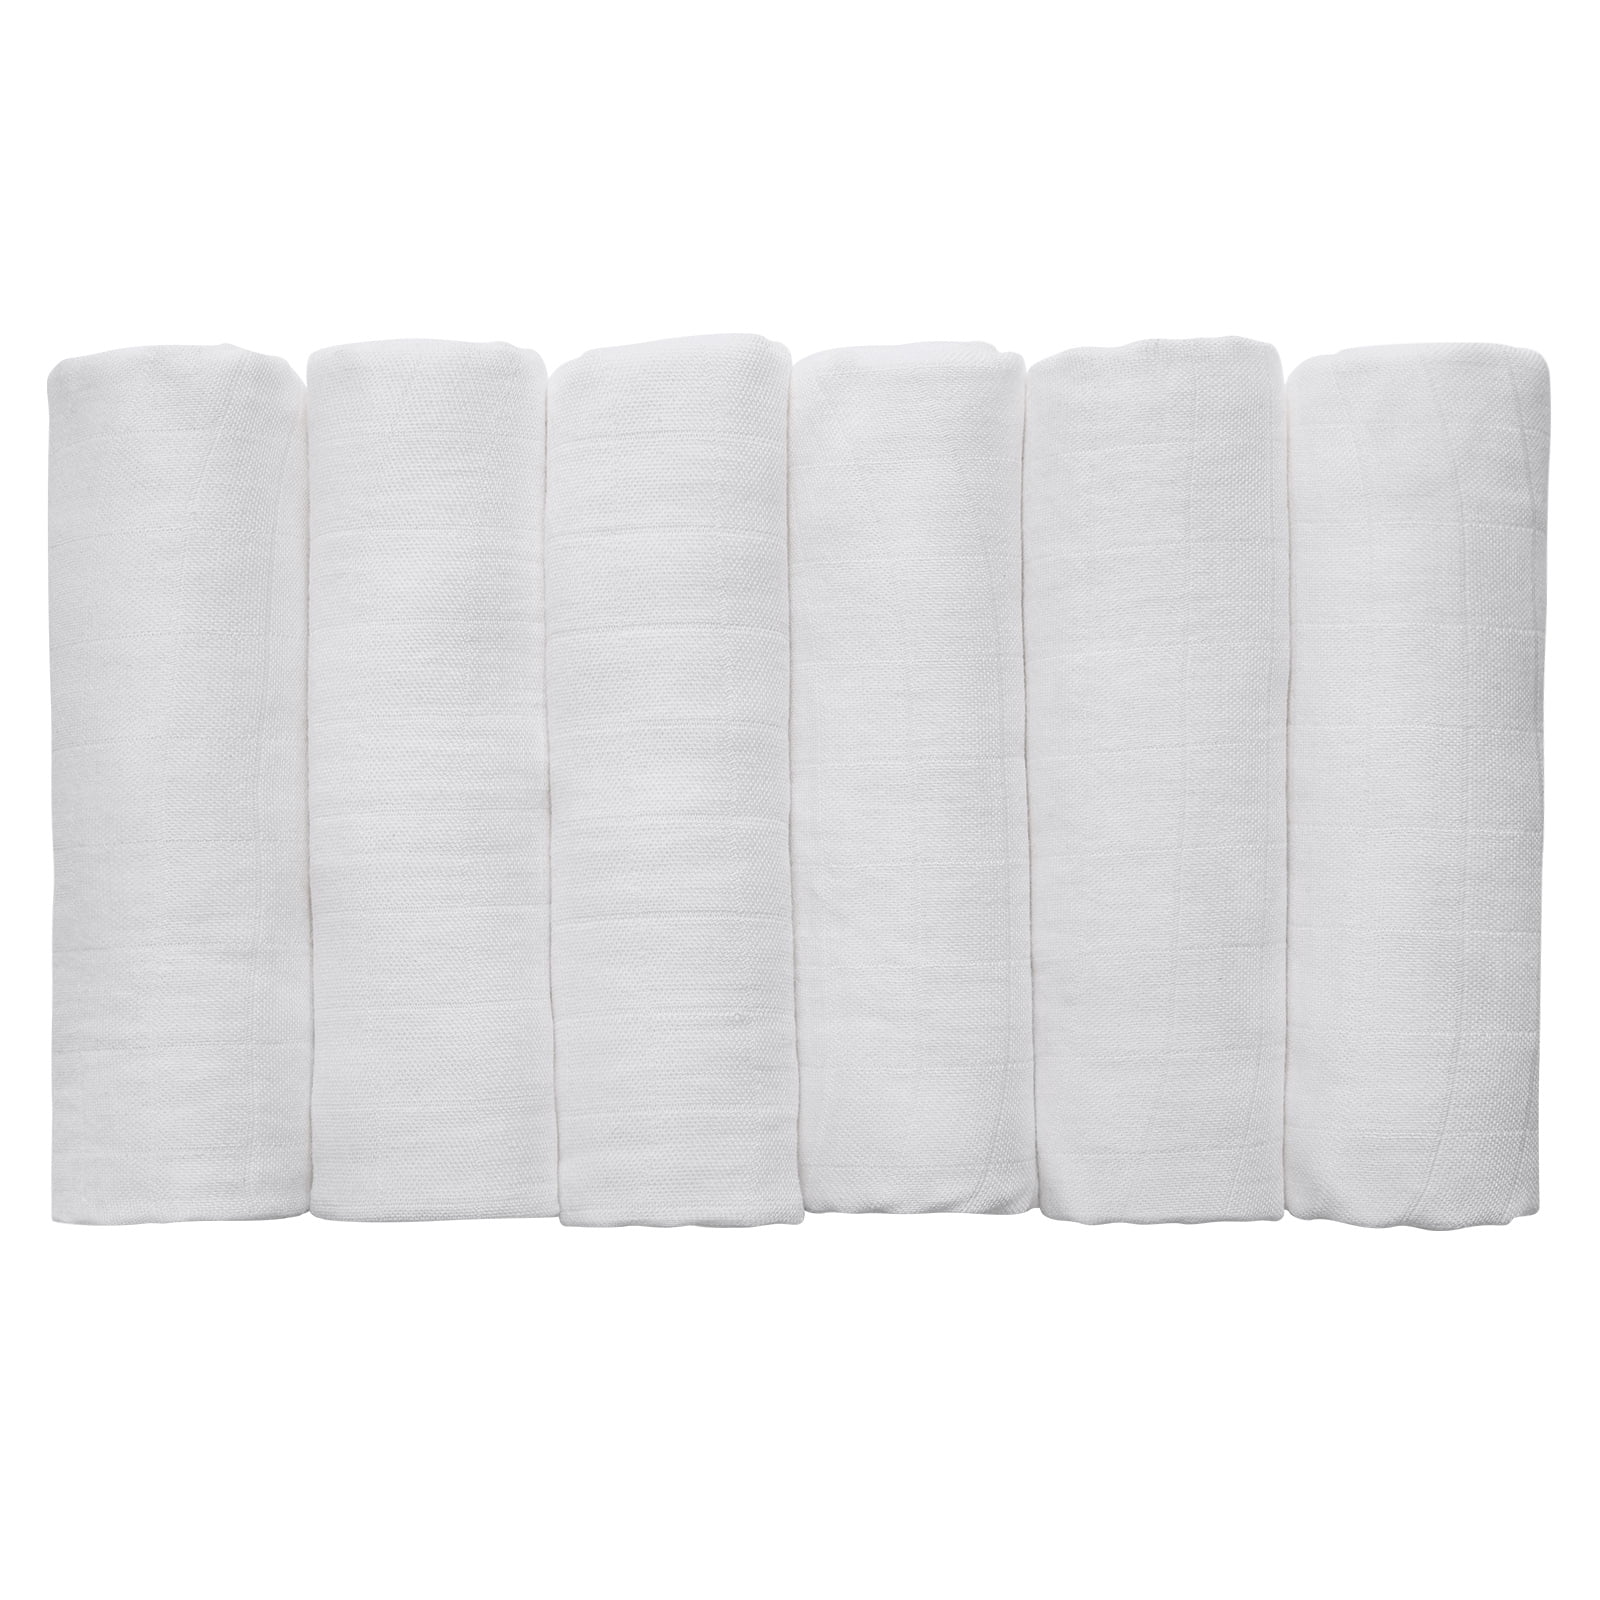 6 Pack Baby Muslin Bath Towels Cotton Soft Infant Towels Large Swaddle  Receiving Blankets 6 Layers 43.3 x 43.3 Inch for Newborn Toddlers Boys Girls